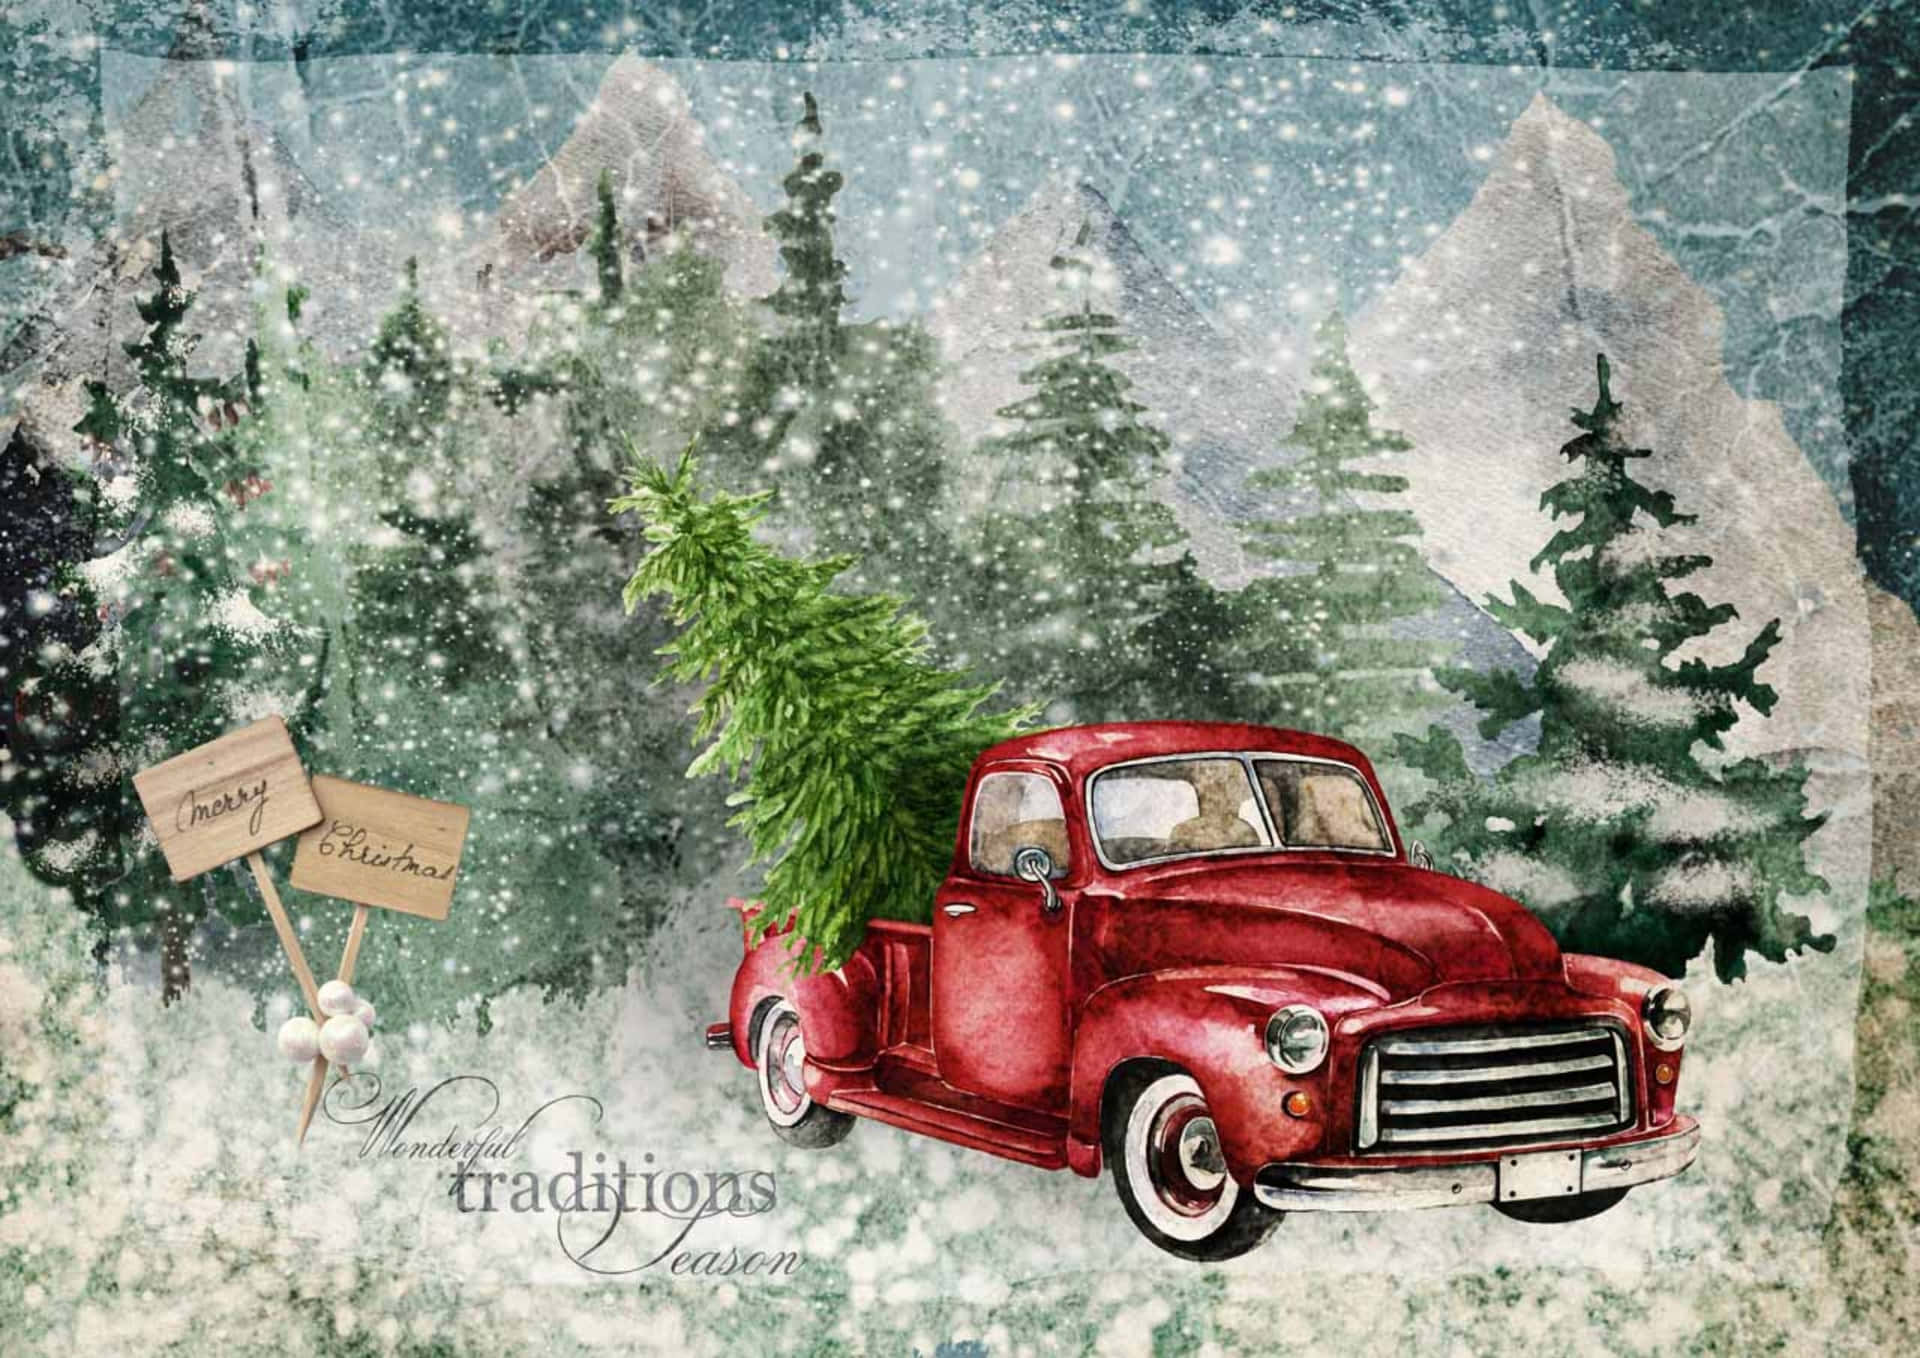 Celebrating the Holidays with a Vintage Truck! Wallpaper